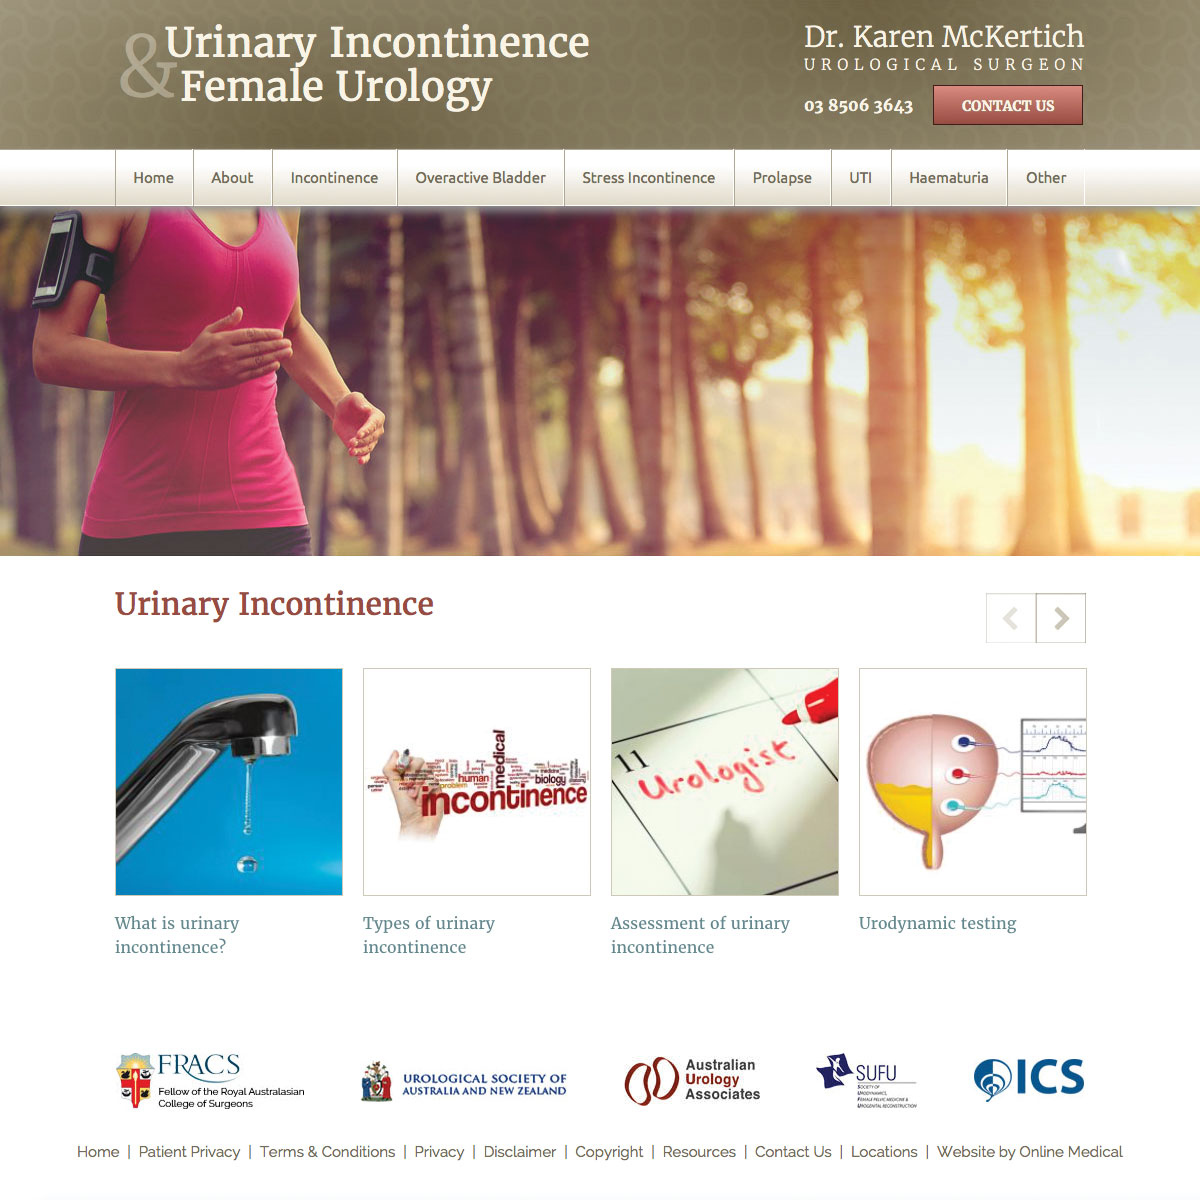 Urinary Incontinence and Female Urology - Index Tiles